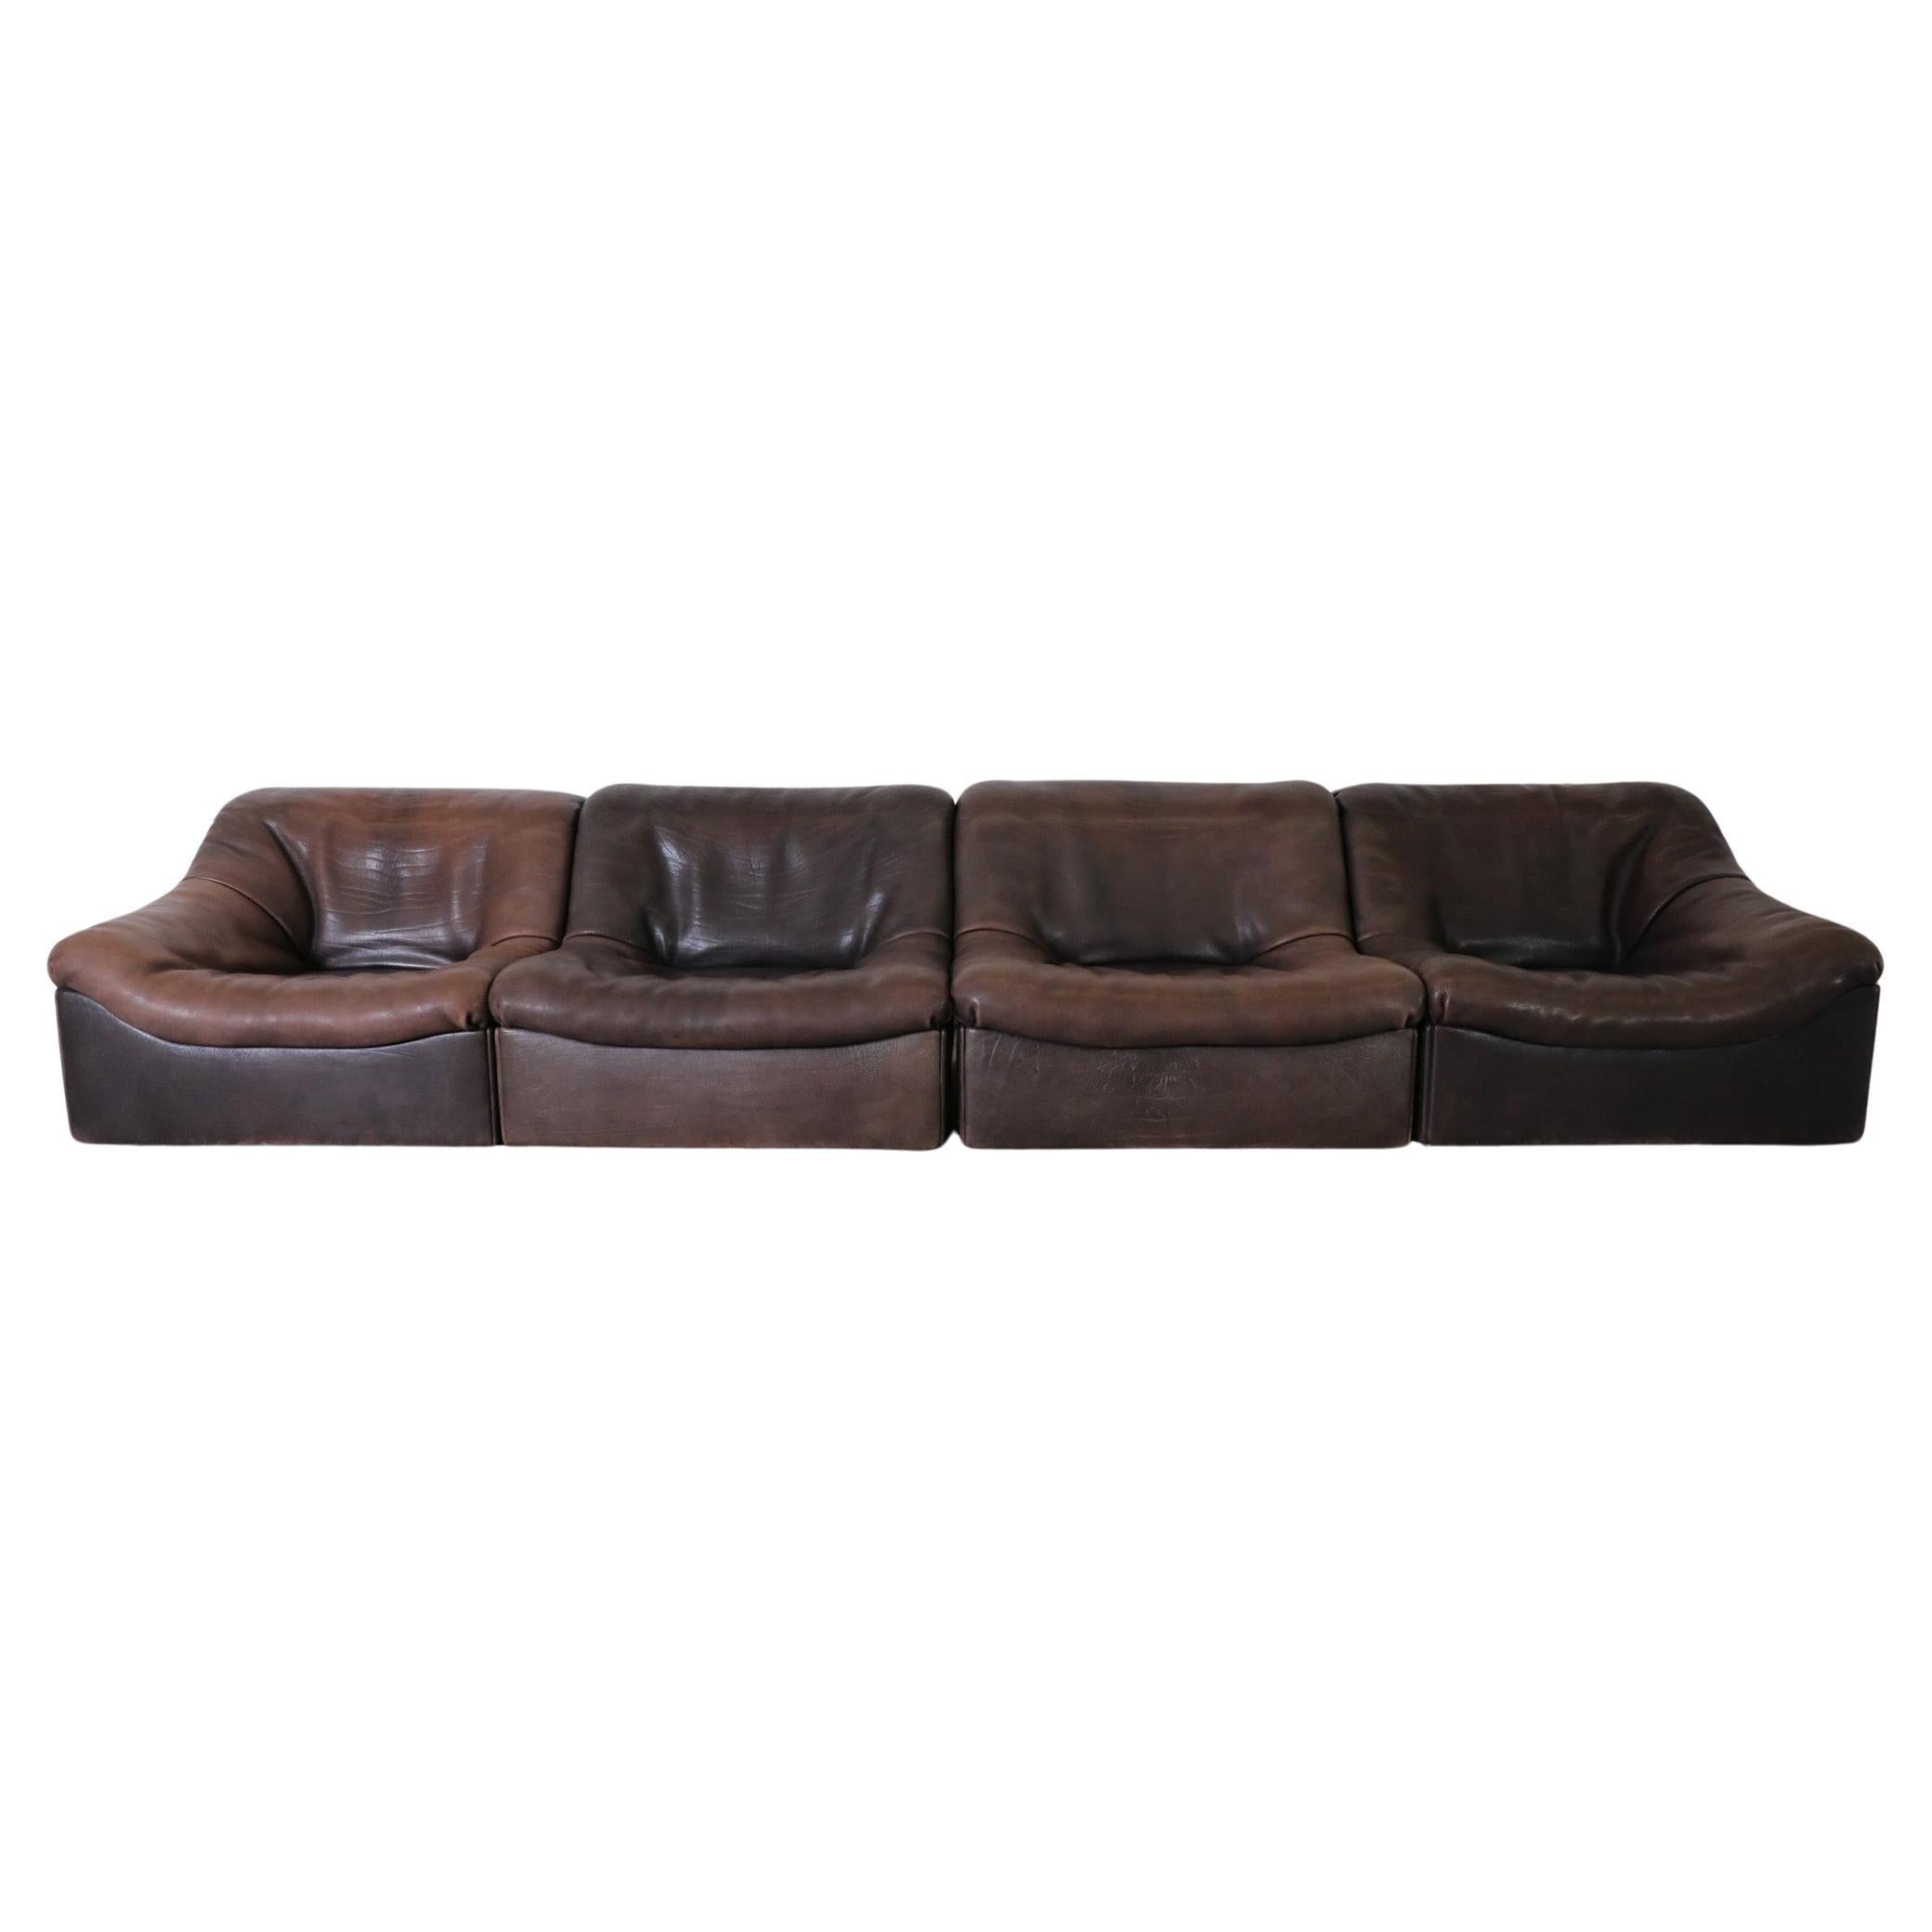 Simply Incredible, 1970's 'DS-46' modular sofa by De Sede. A gorgeous four-section sofa upholstered in thick dark buffalo leather. Heavy individual pieces that can be re-positioned and re-arranged to compliment any living space while providing a